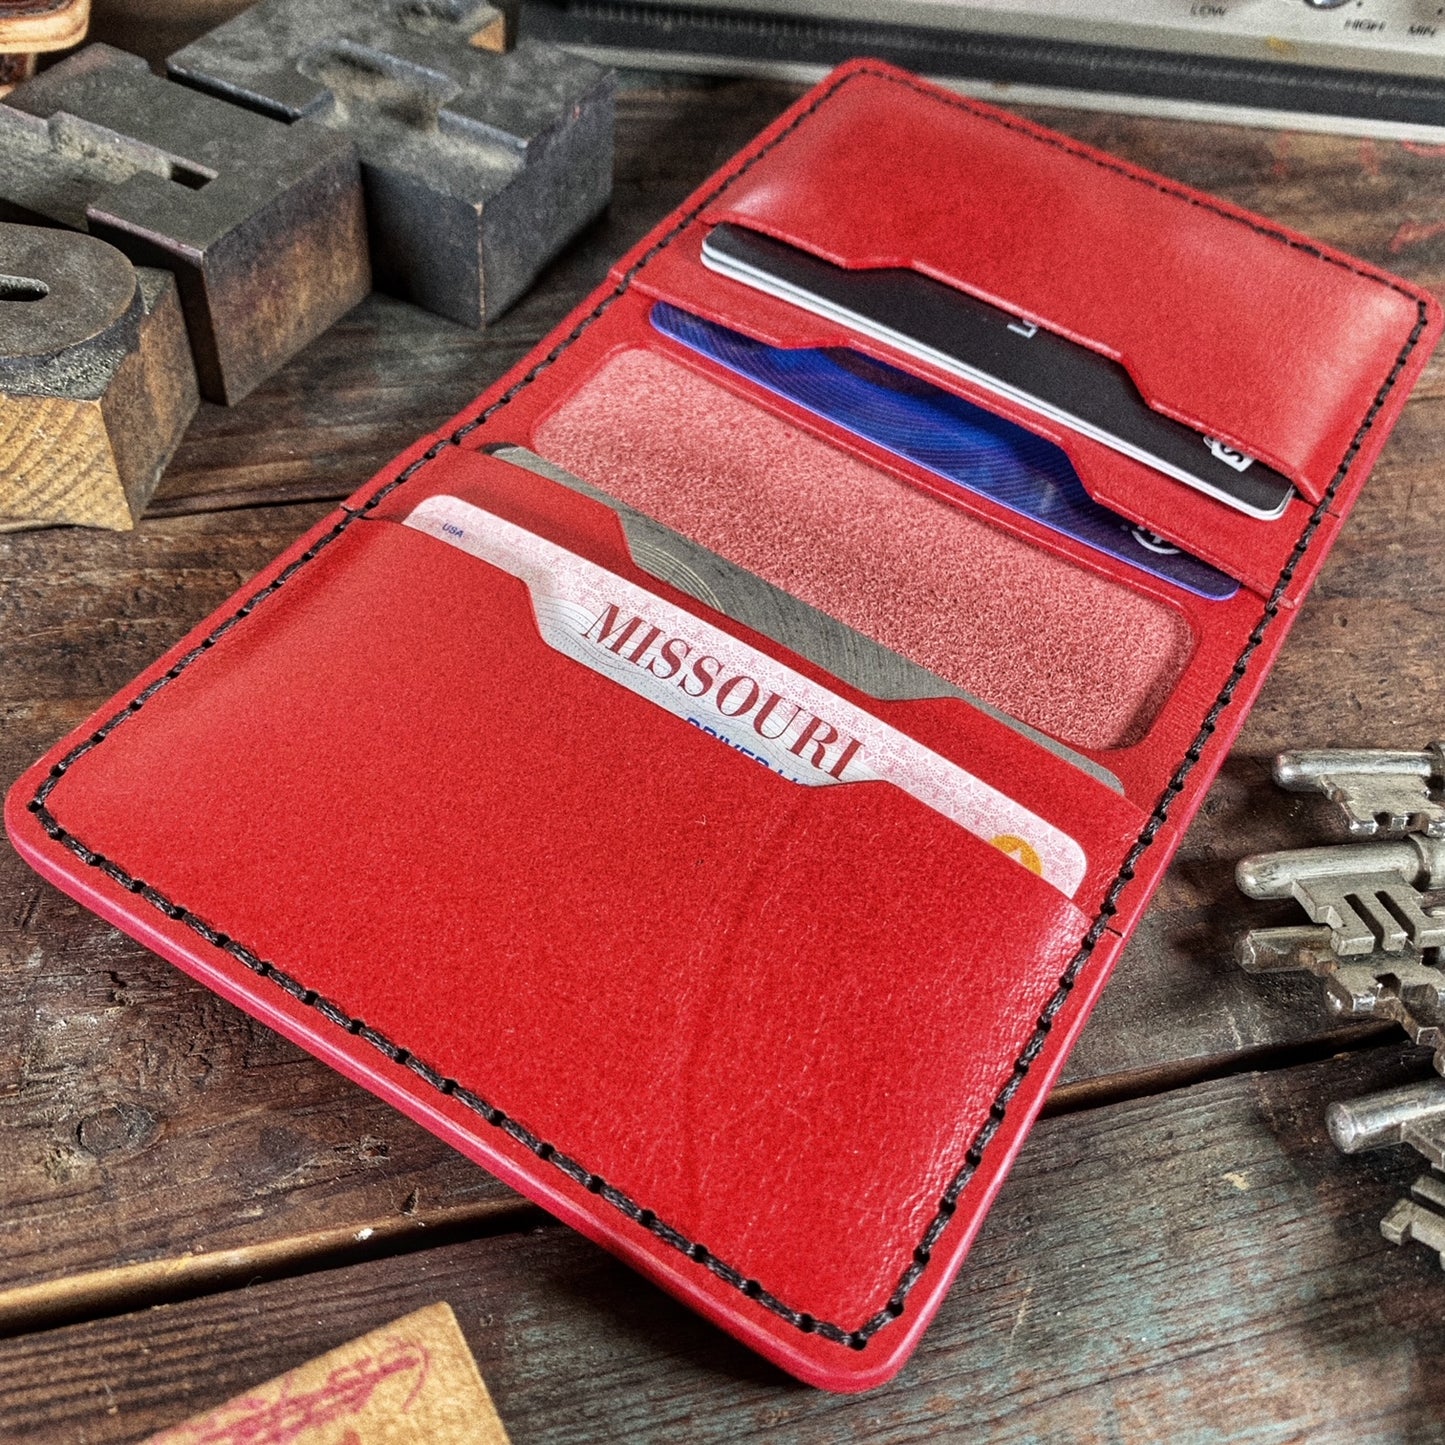 (Only 1) Handmade 6 Pocket Circle J Branded Red Leather Bifold Minimalist Wallet